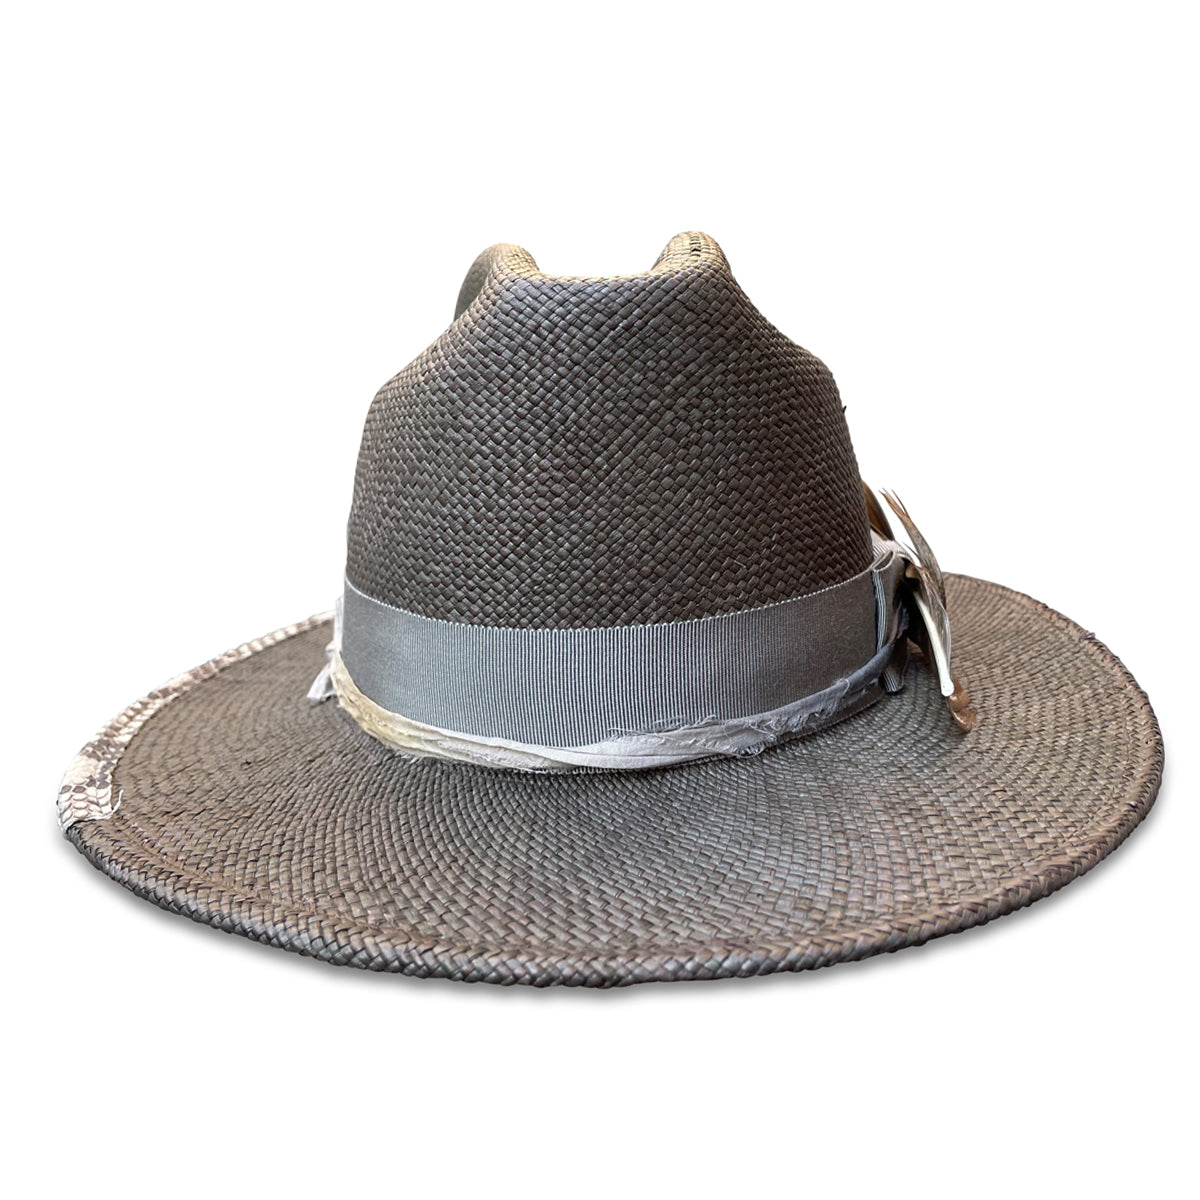 Straw cowboy hat with an open road style crown, grosgrain ribbon, sari silk, and a snake skin patch on the brim